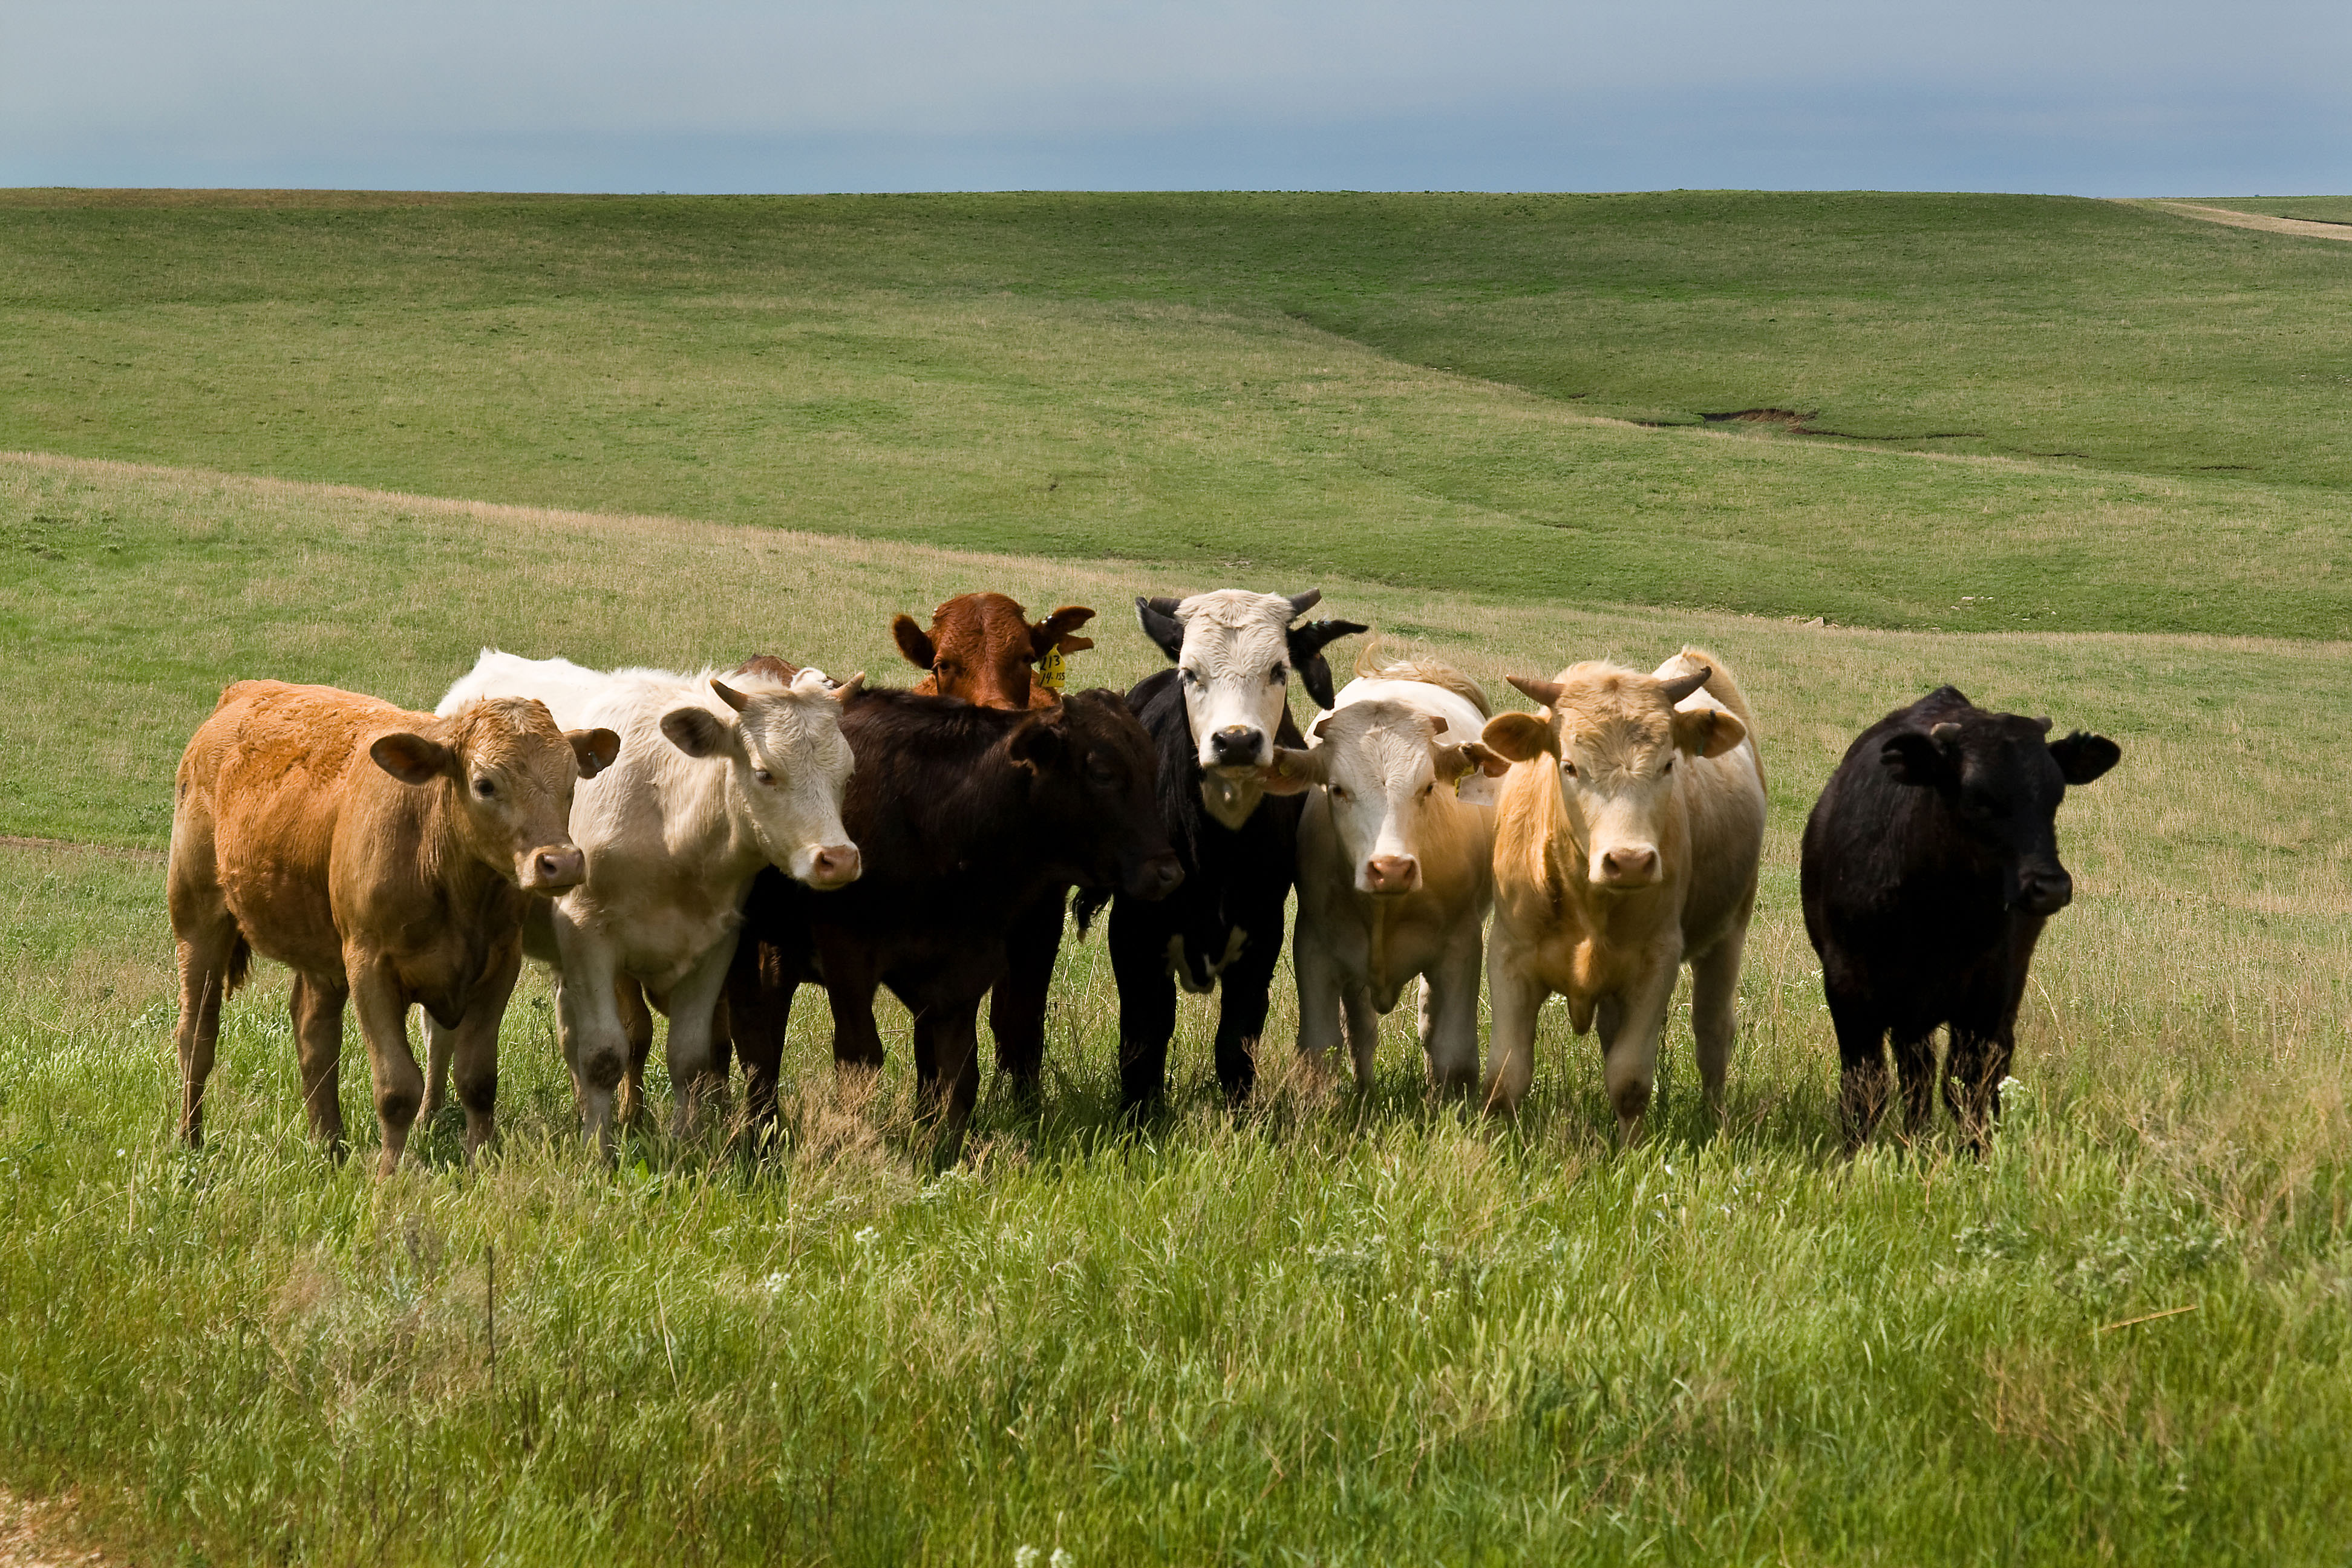 Eight cows standing in a line in a grassy green field.